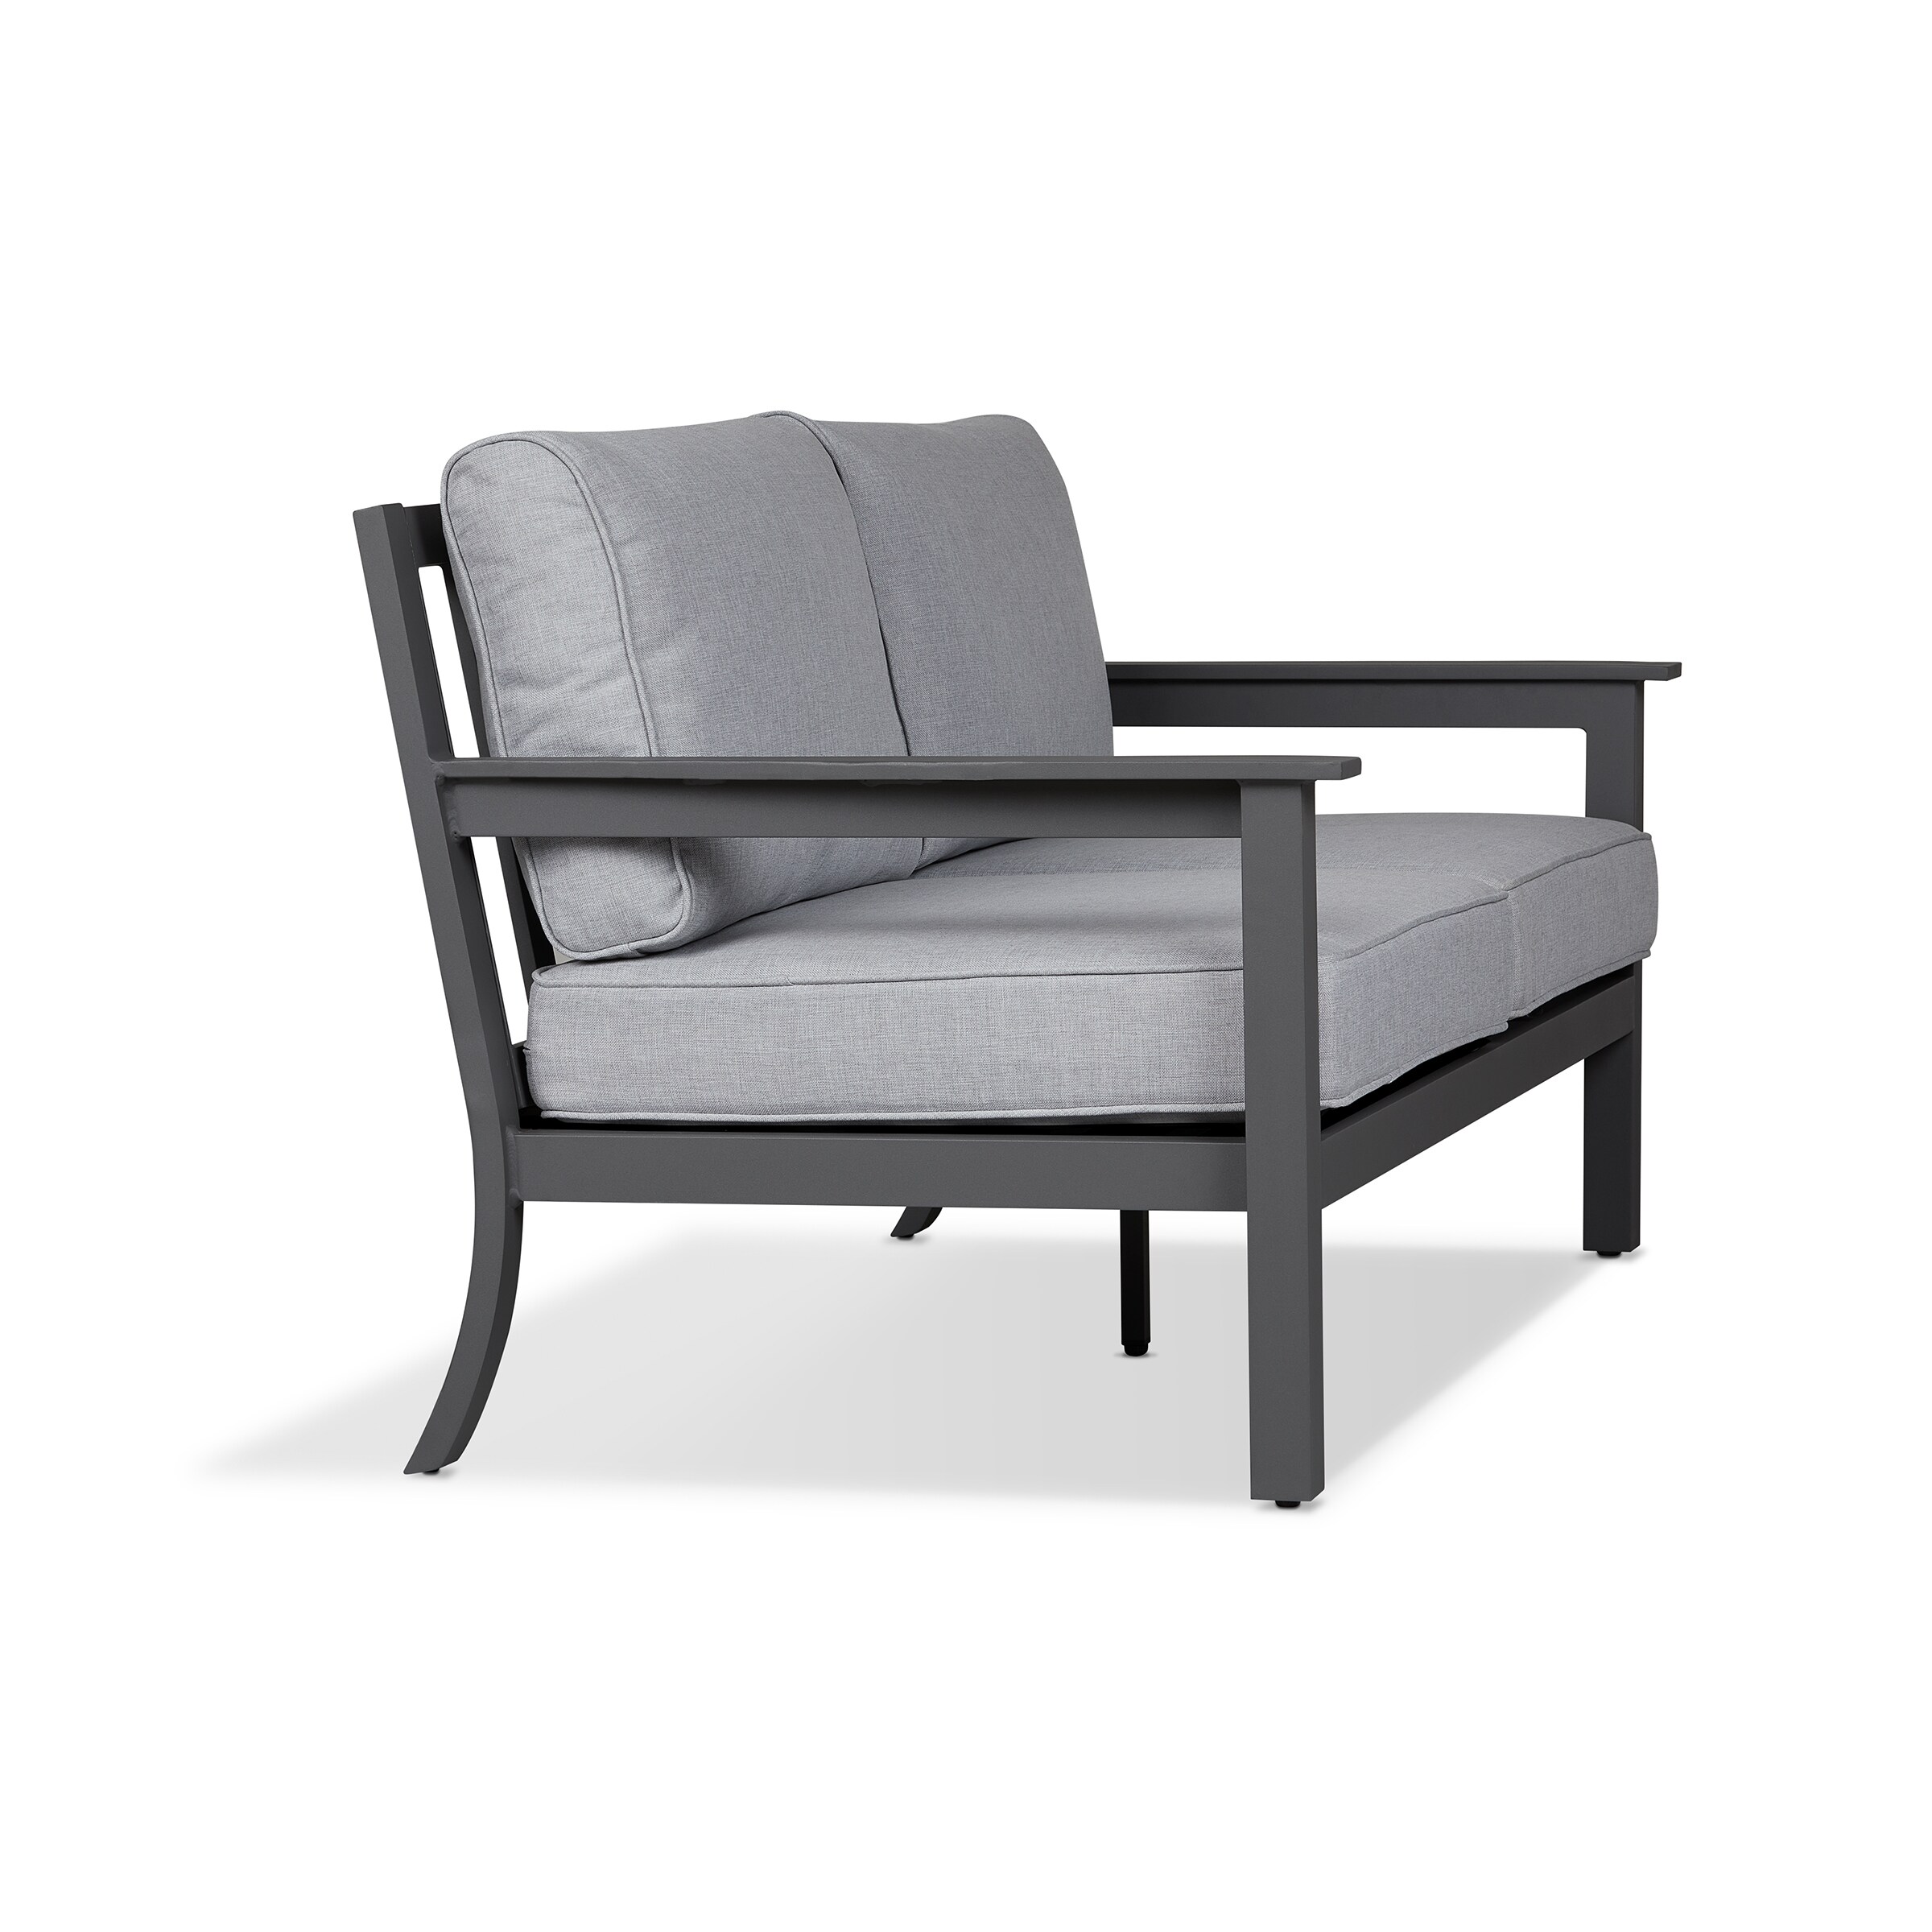 Patio Gray Outdoor Real Sofas Gray Cushions with Ortun at Sofa department in in Sectionals Light the 2-Seat Flame &